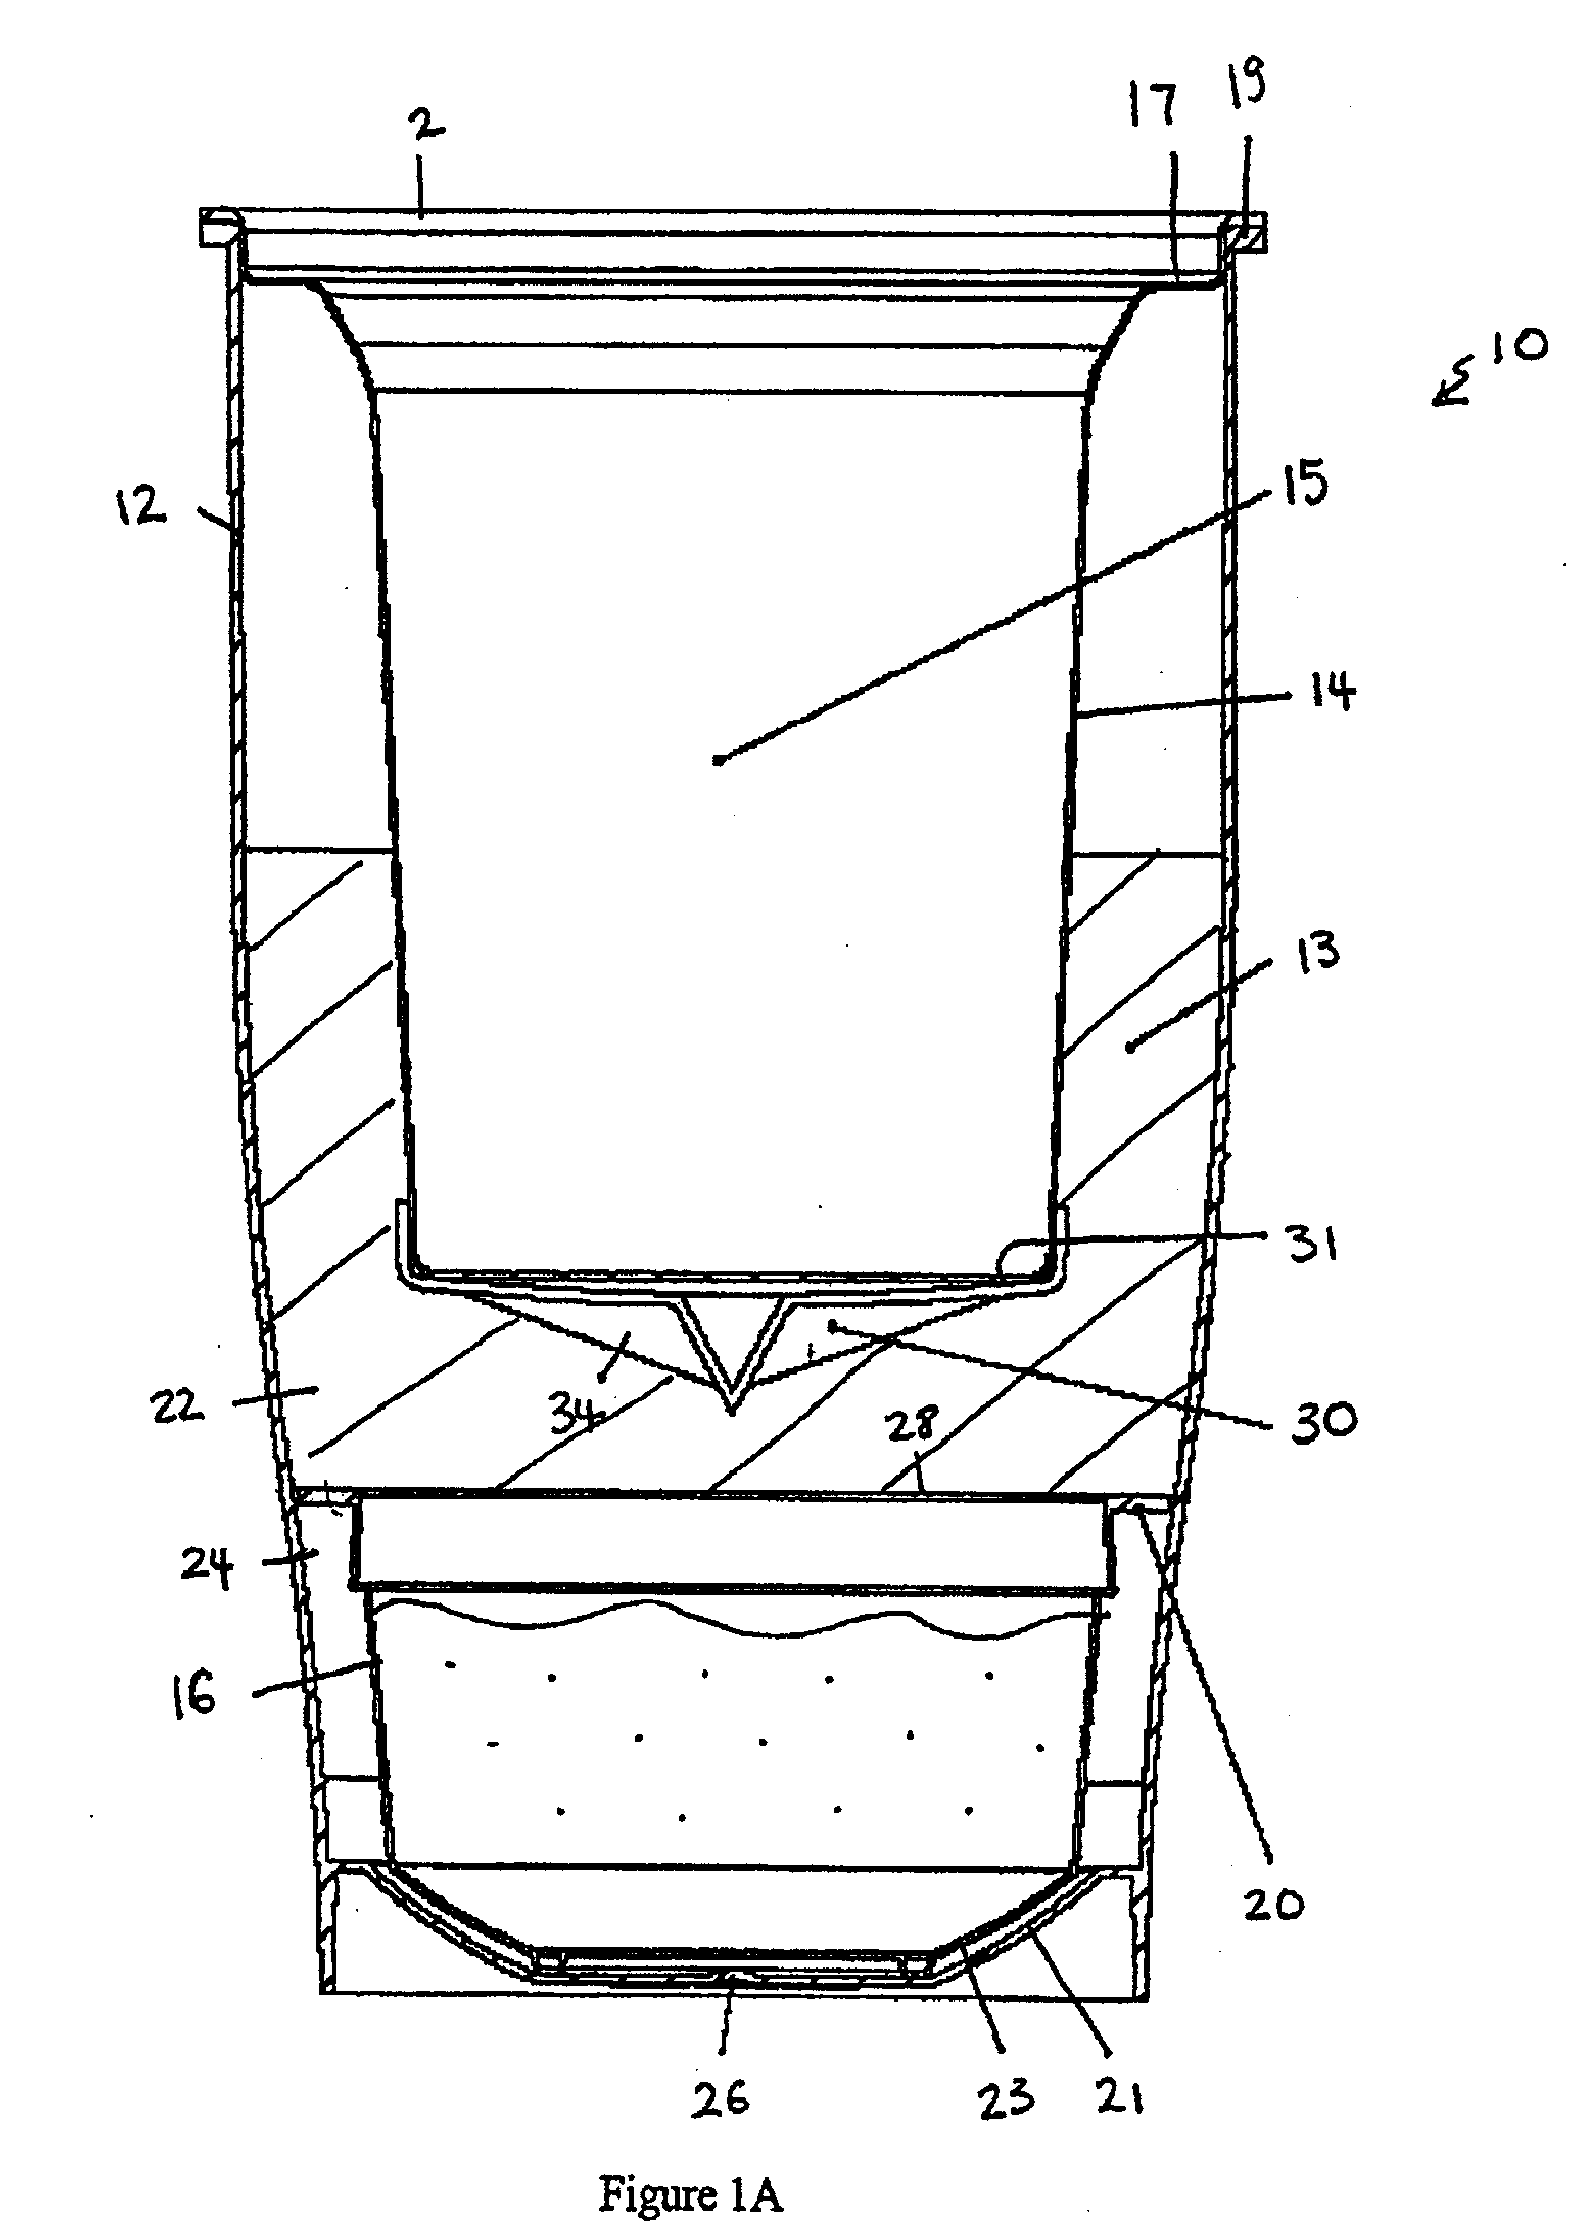 Self-heating container